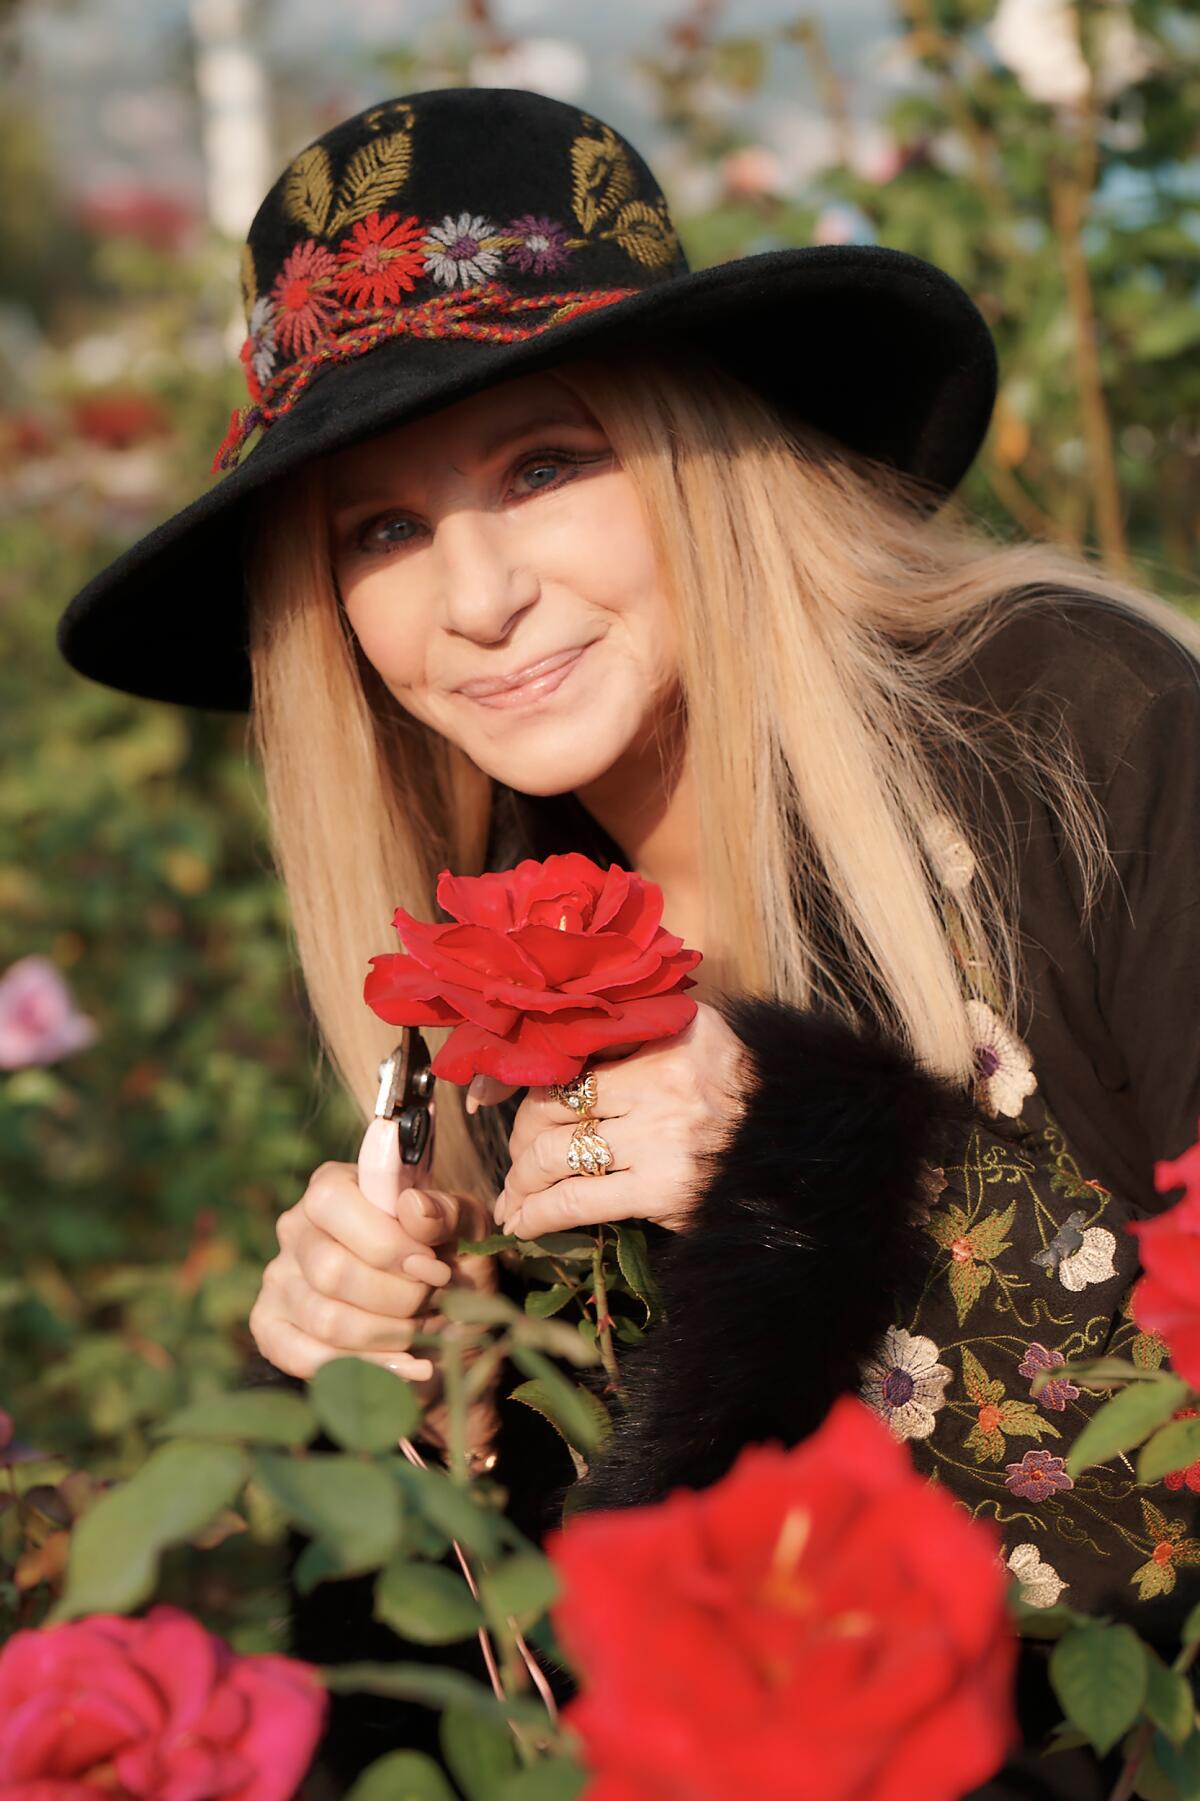 Barbra Streisand holds a rose as she stands outside in a garden.